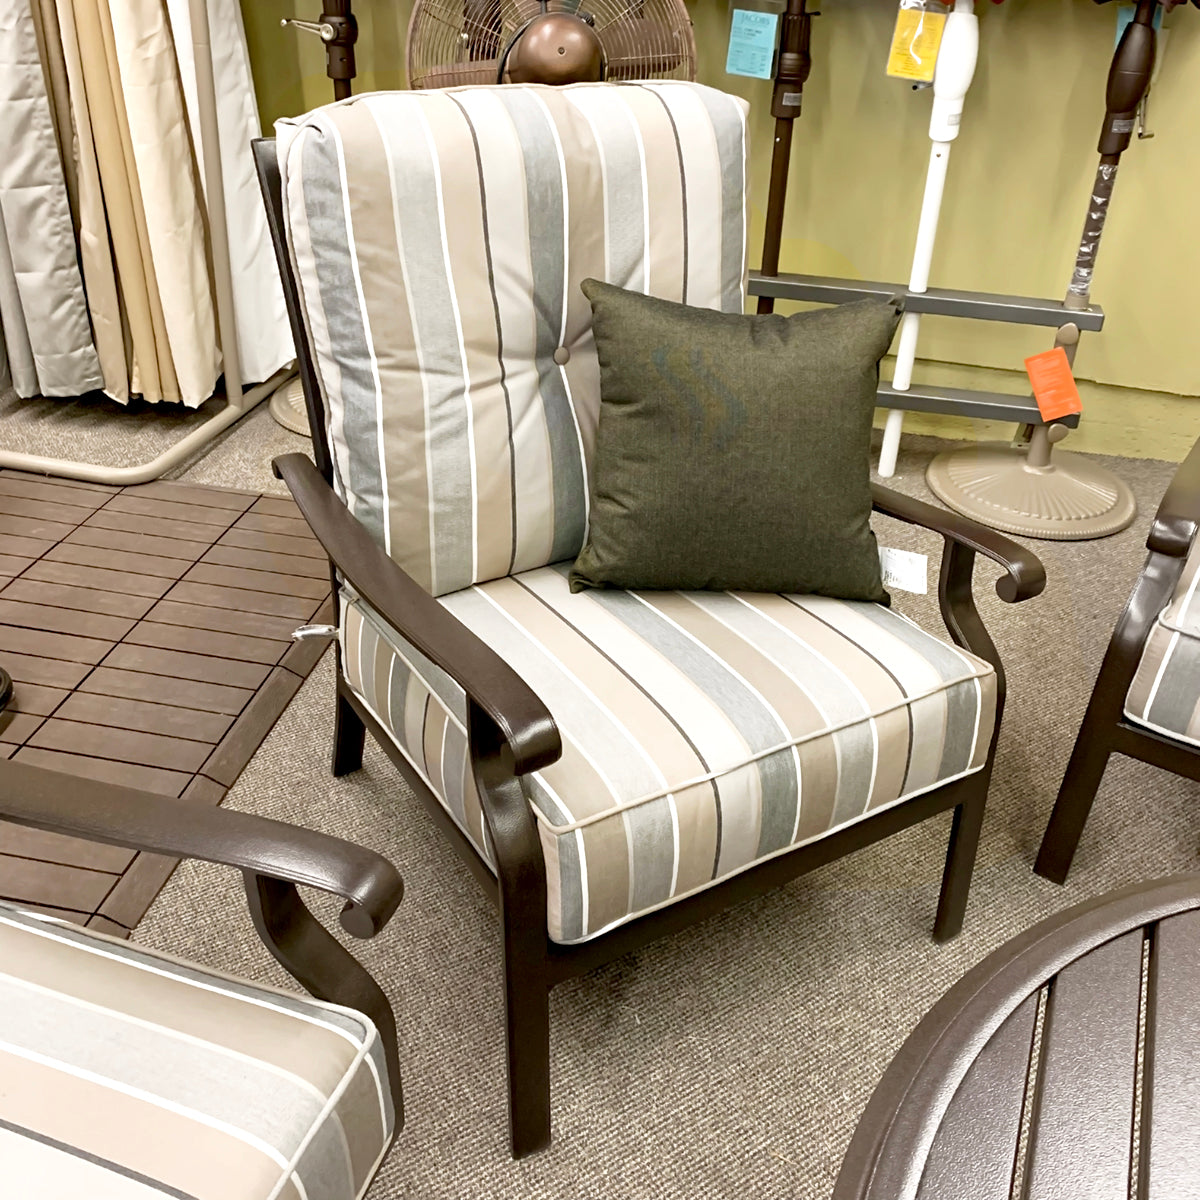 Patio Renaissance Mandalay Patio Lounge Chair is available at Jacobs Custom Living our Jacobs Custom Living Spokane Valley showroom.